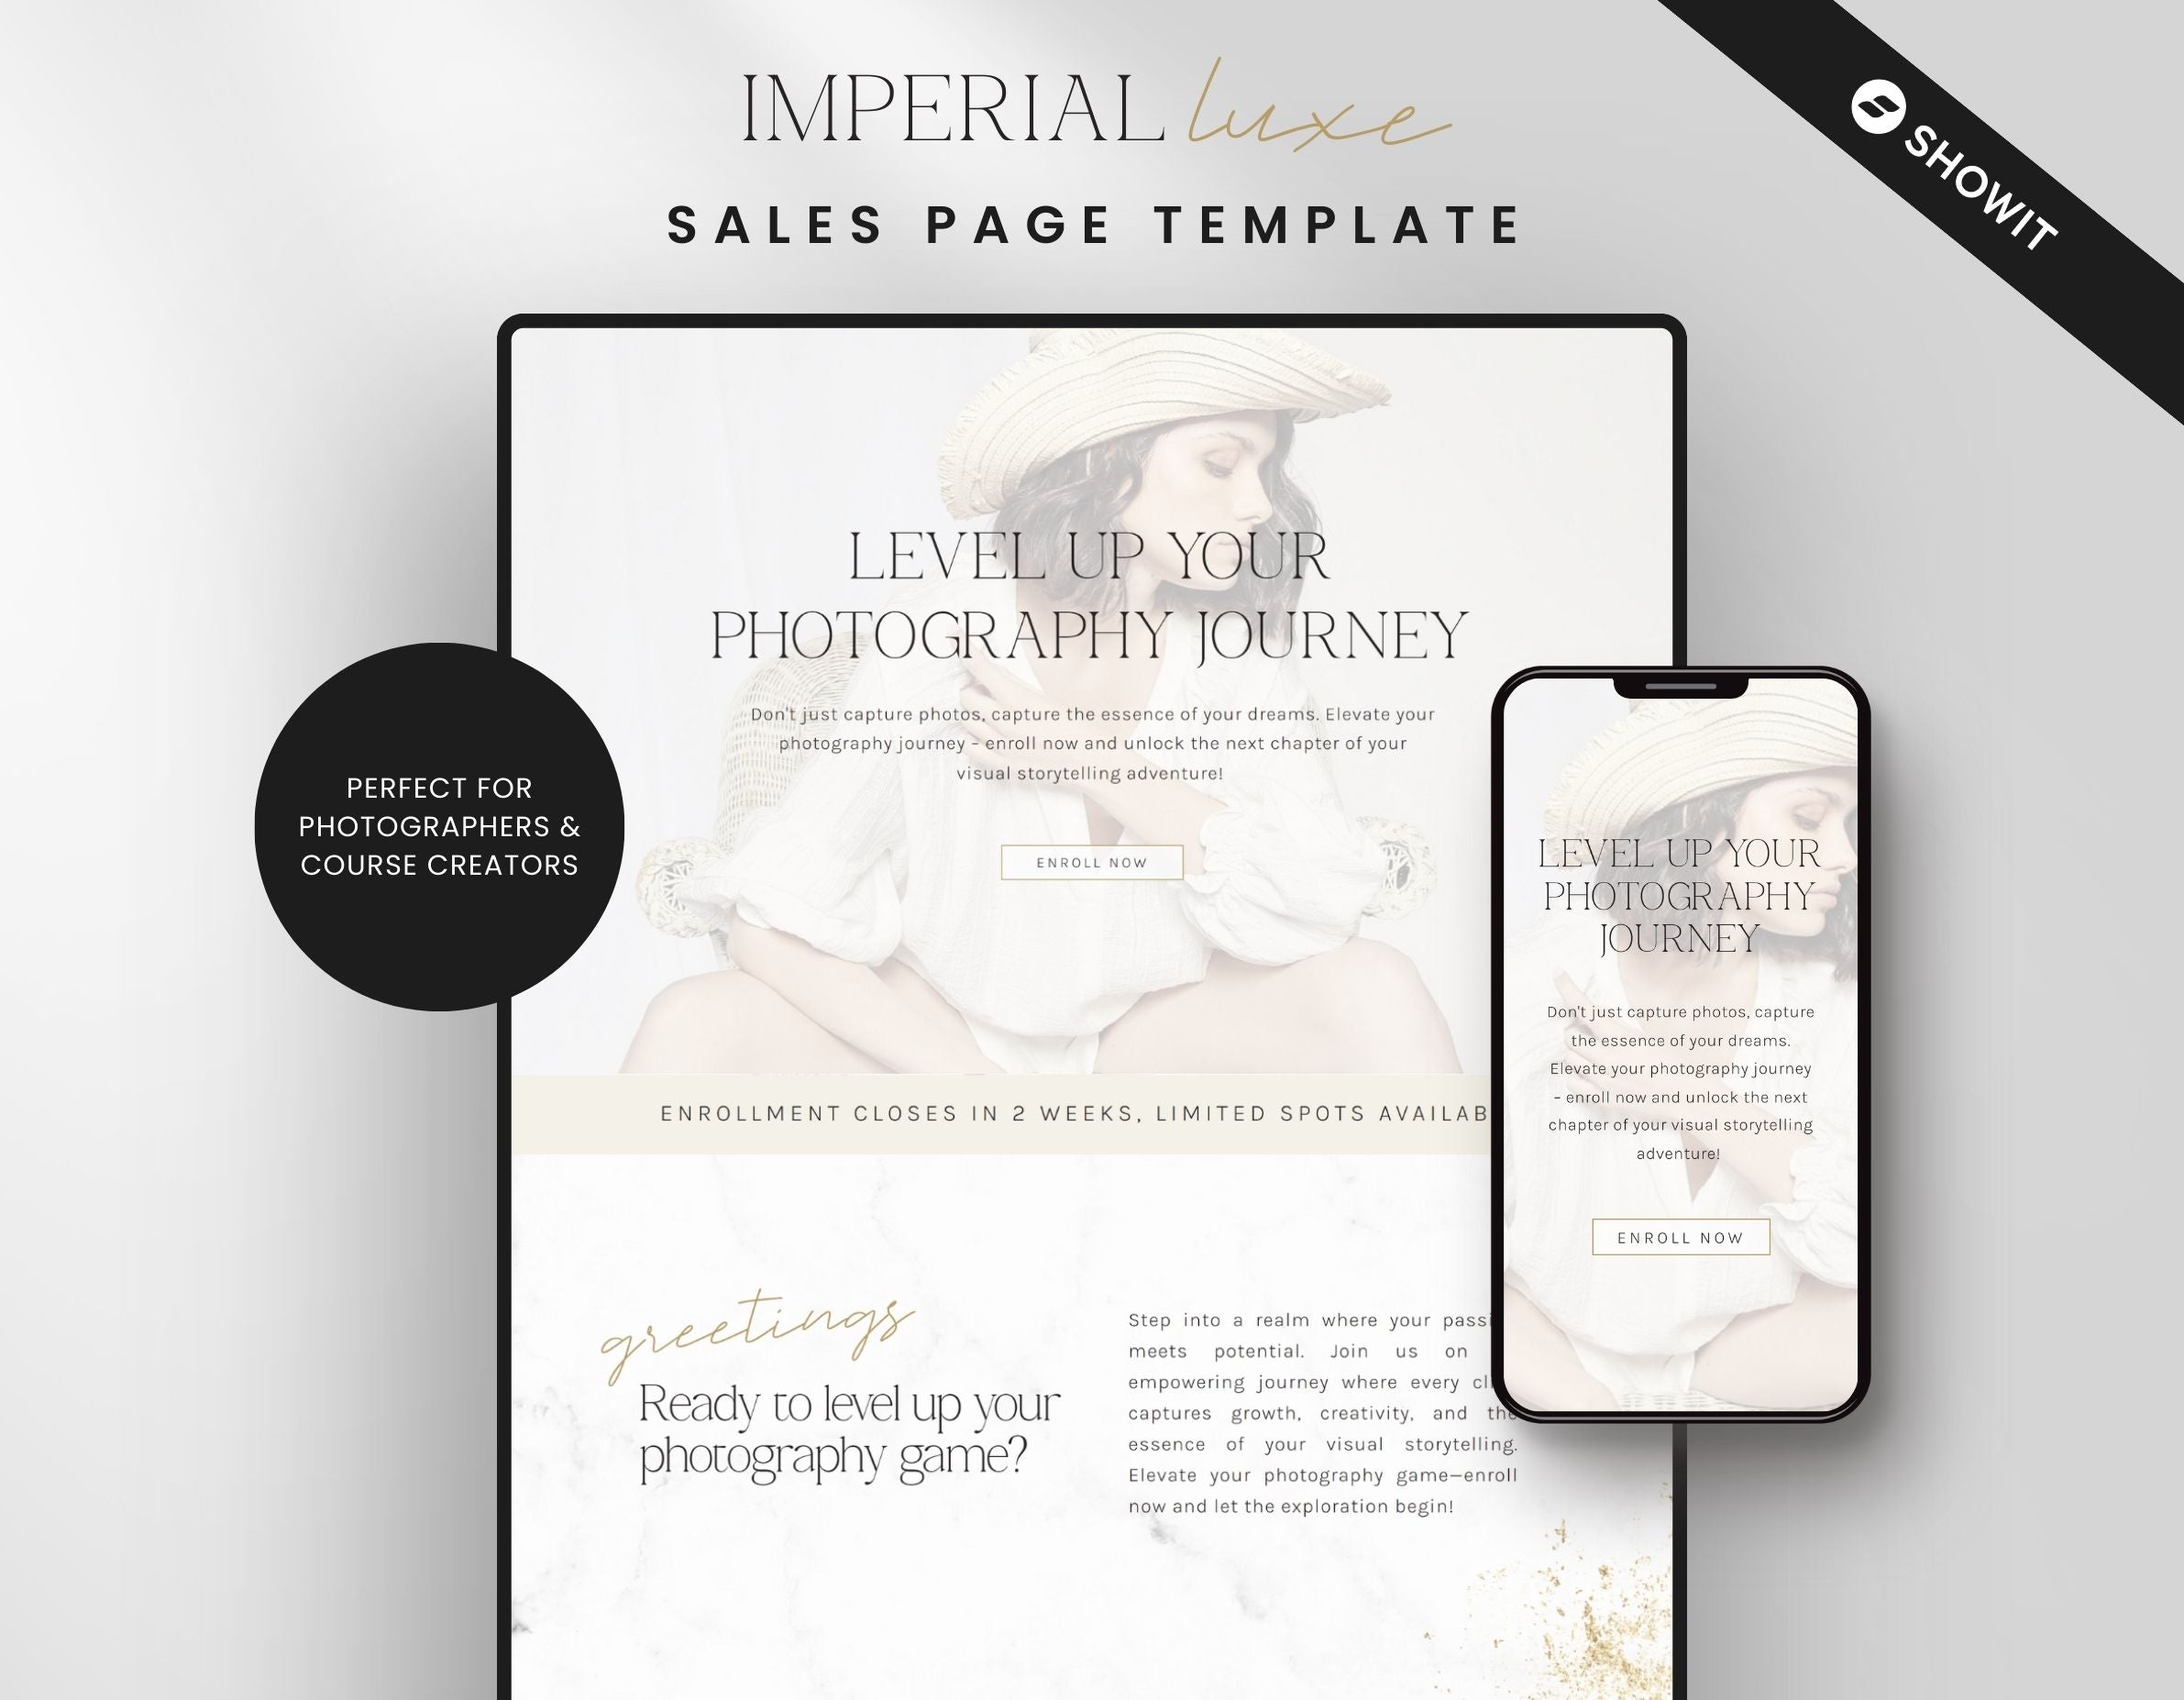 Luxury Showit Sales Page Template for Photographers DigiPax